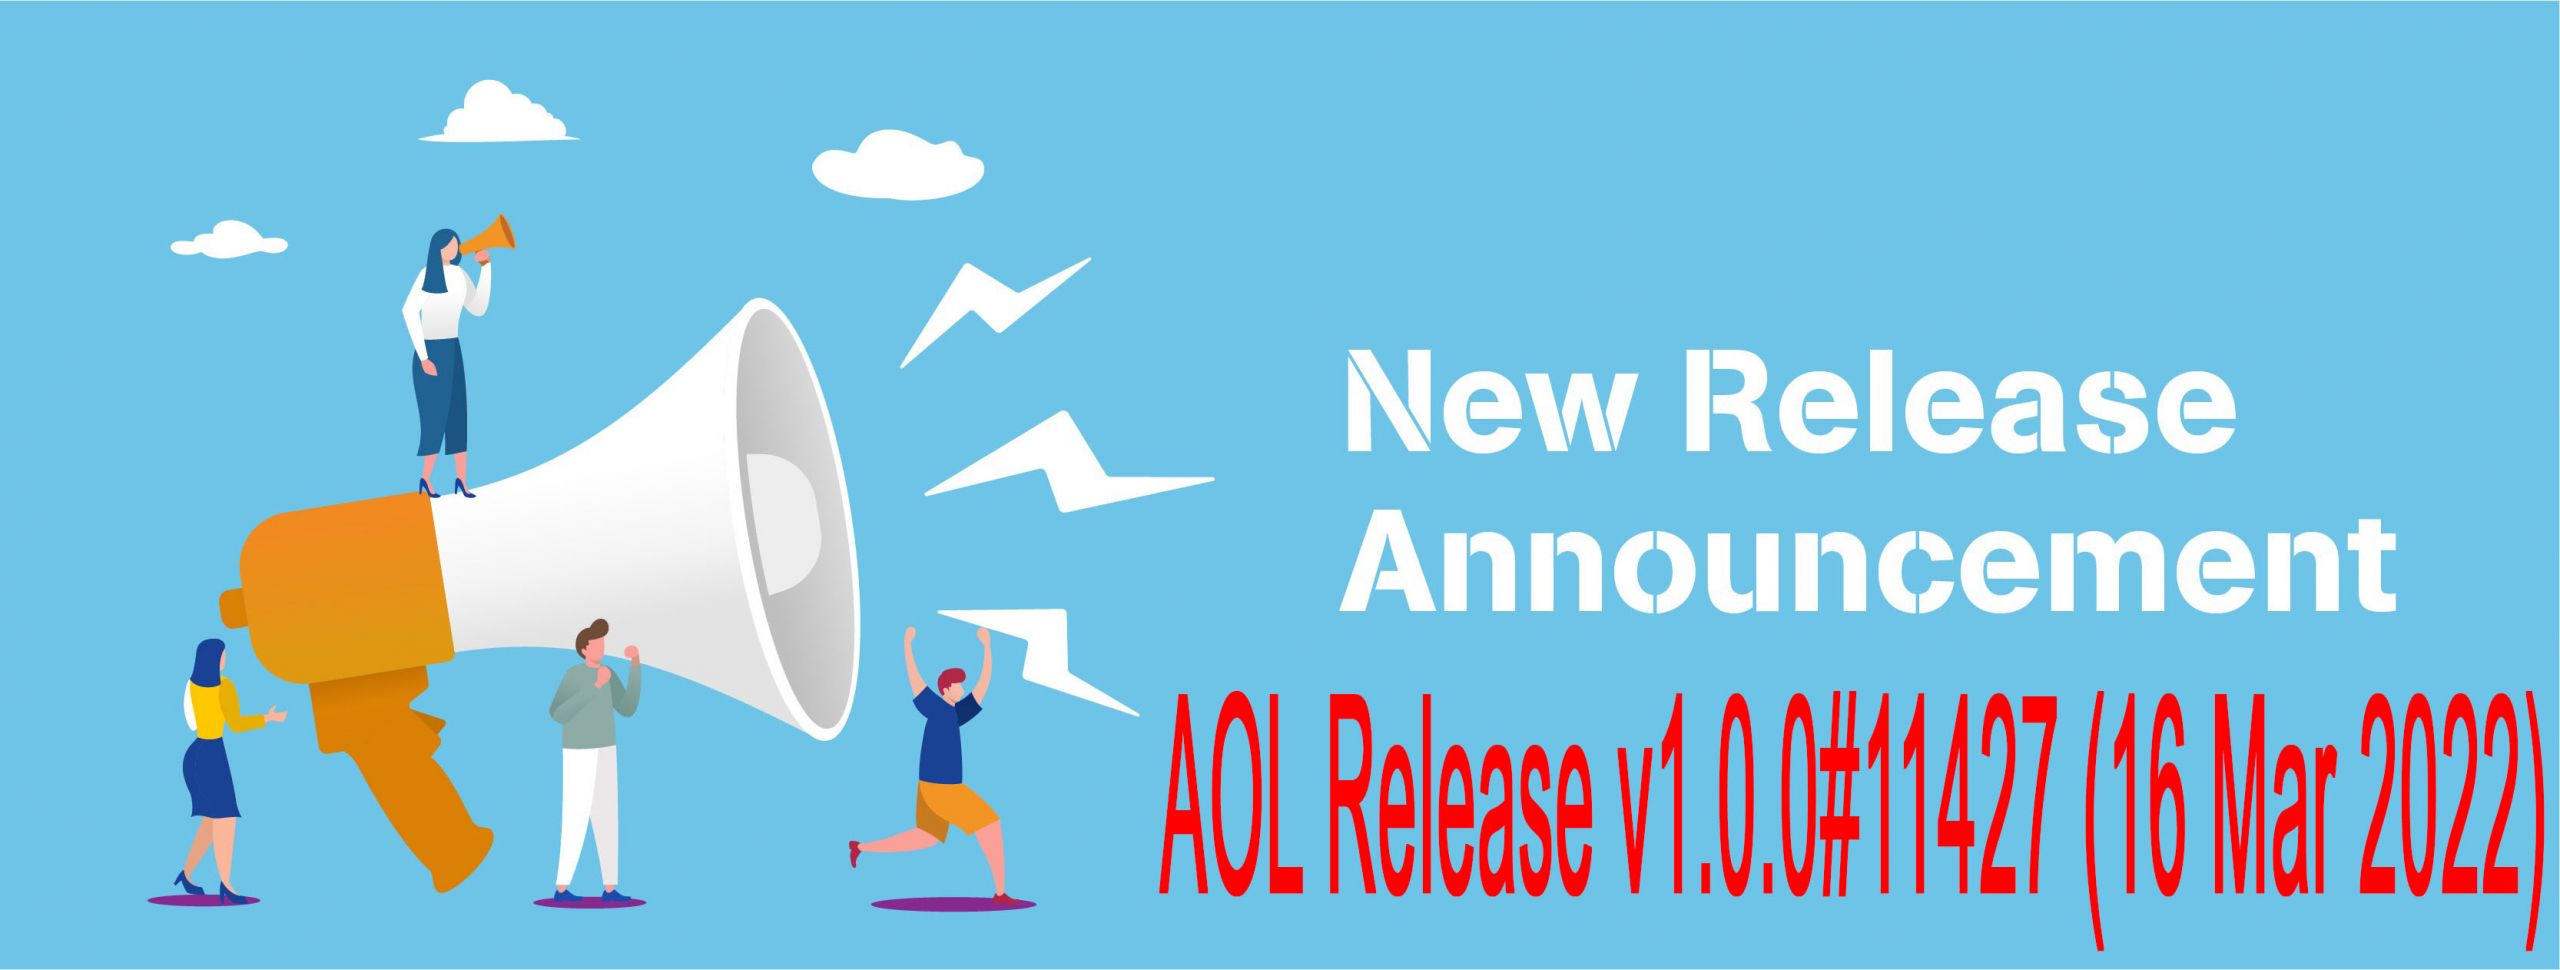 Accurate Online Release v1.0.0#11427 (16 Mar 2022)